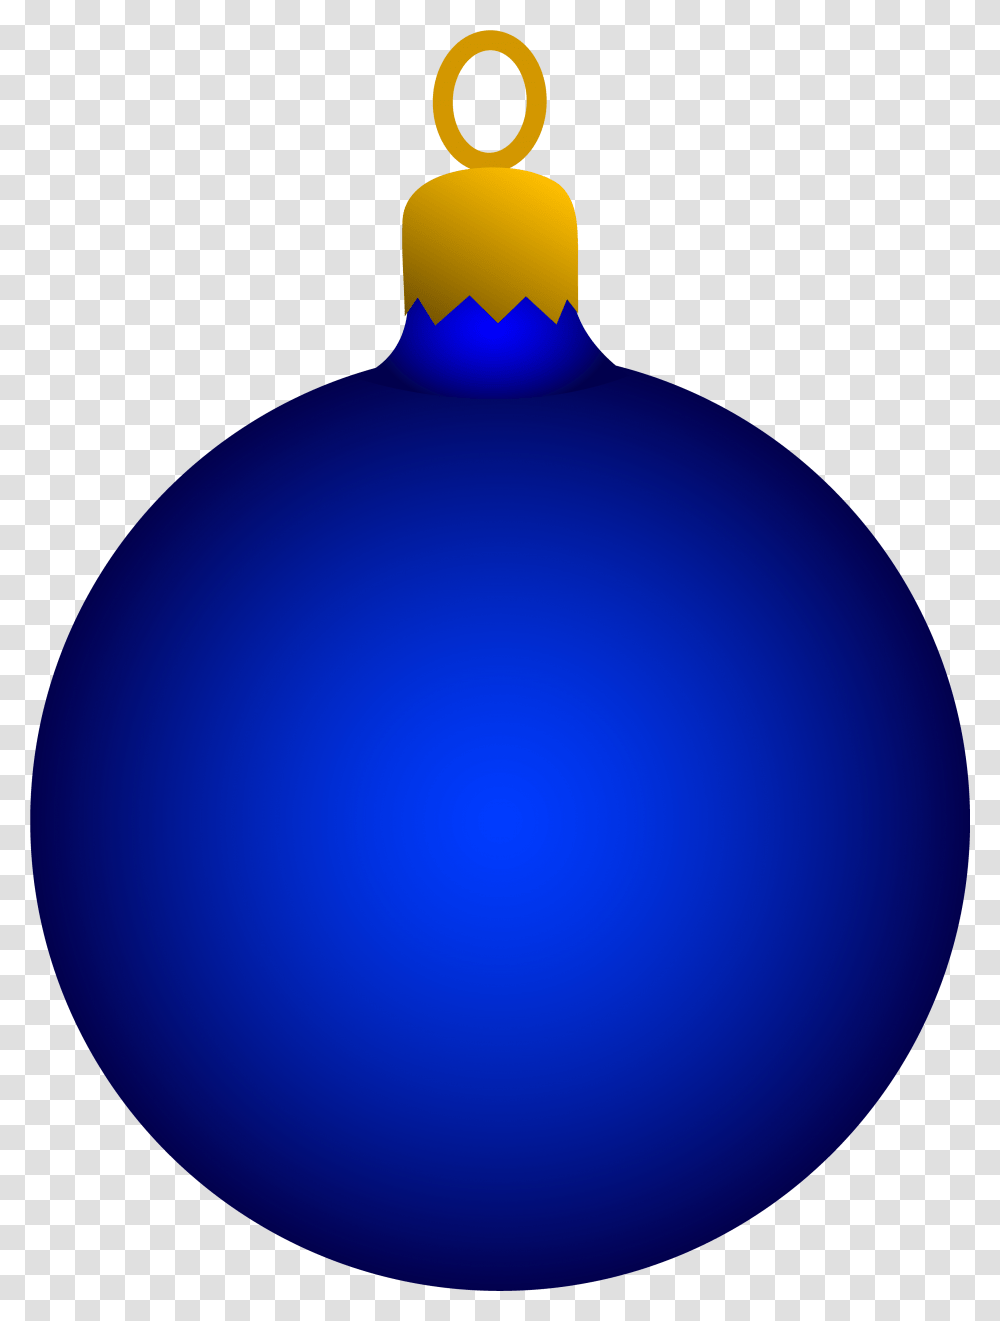 Free Christmas Ornaments Clipart Download Clip Art Ornaments Clipart, Balloon, Sphere, Jar, Outdoors Transparent Png